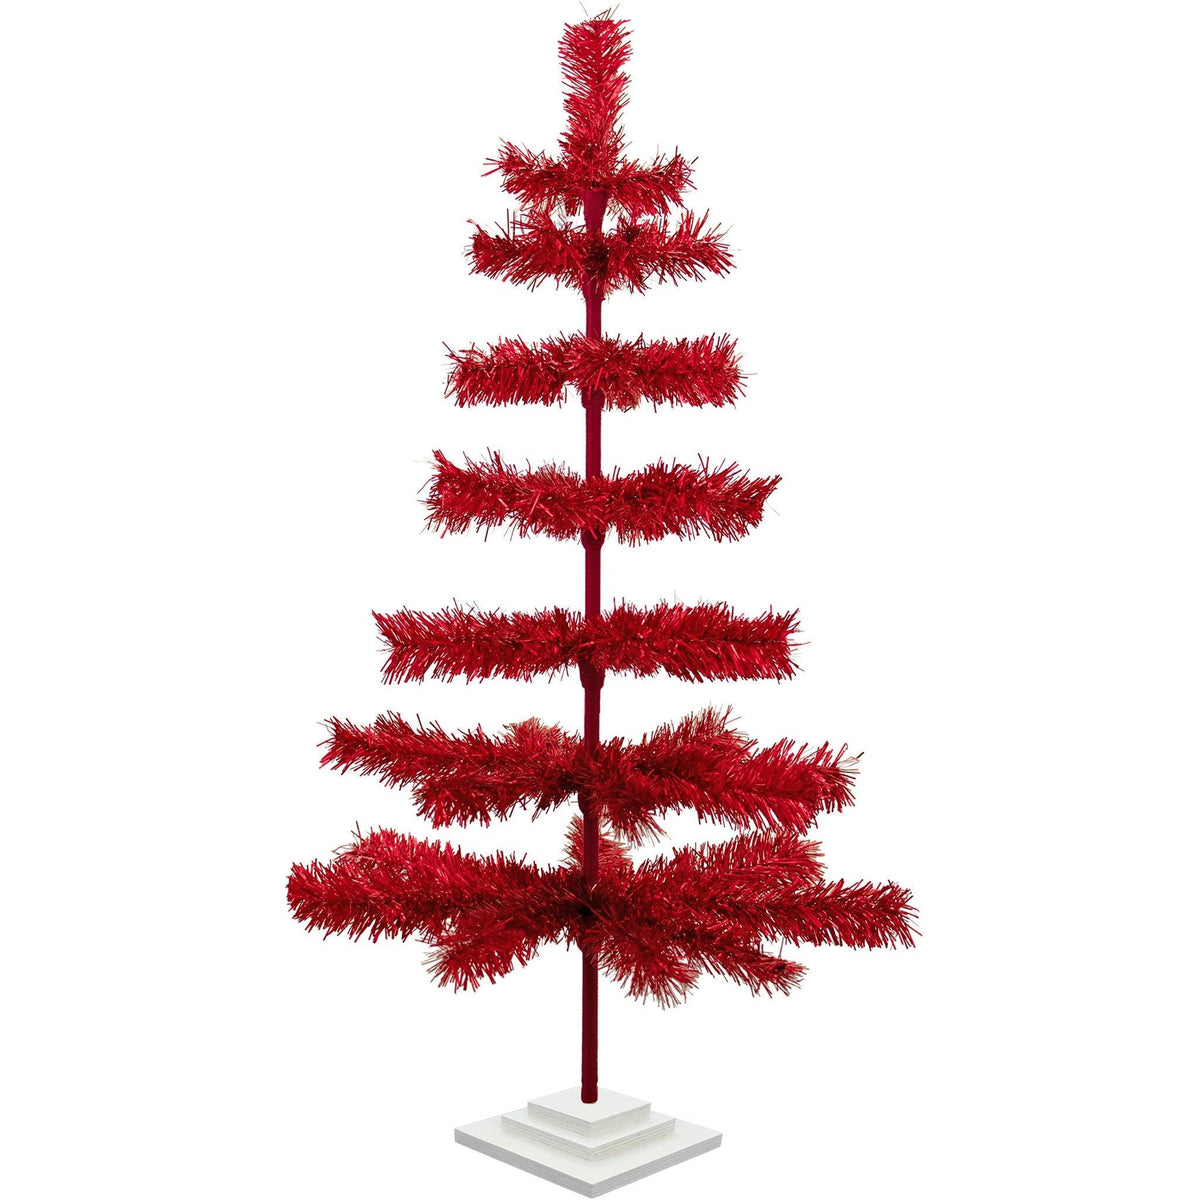 The 36 inch Tall Red Tinsel Christmas Tree from Lee Display. On sale now at leedisplay.com